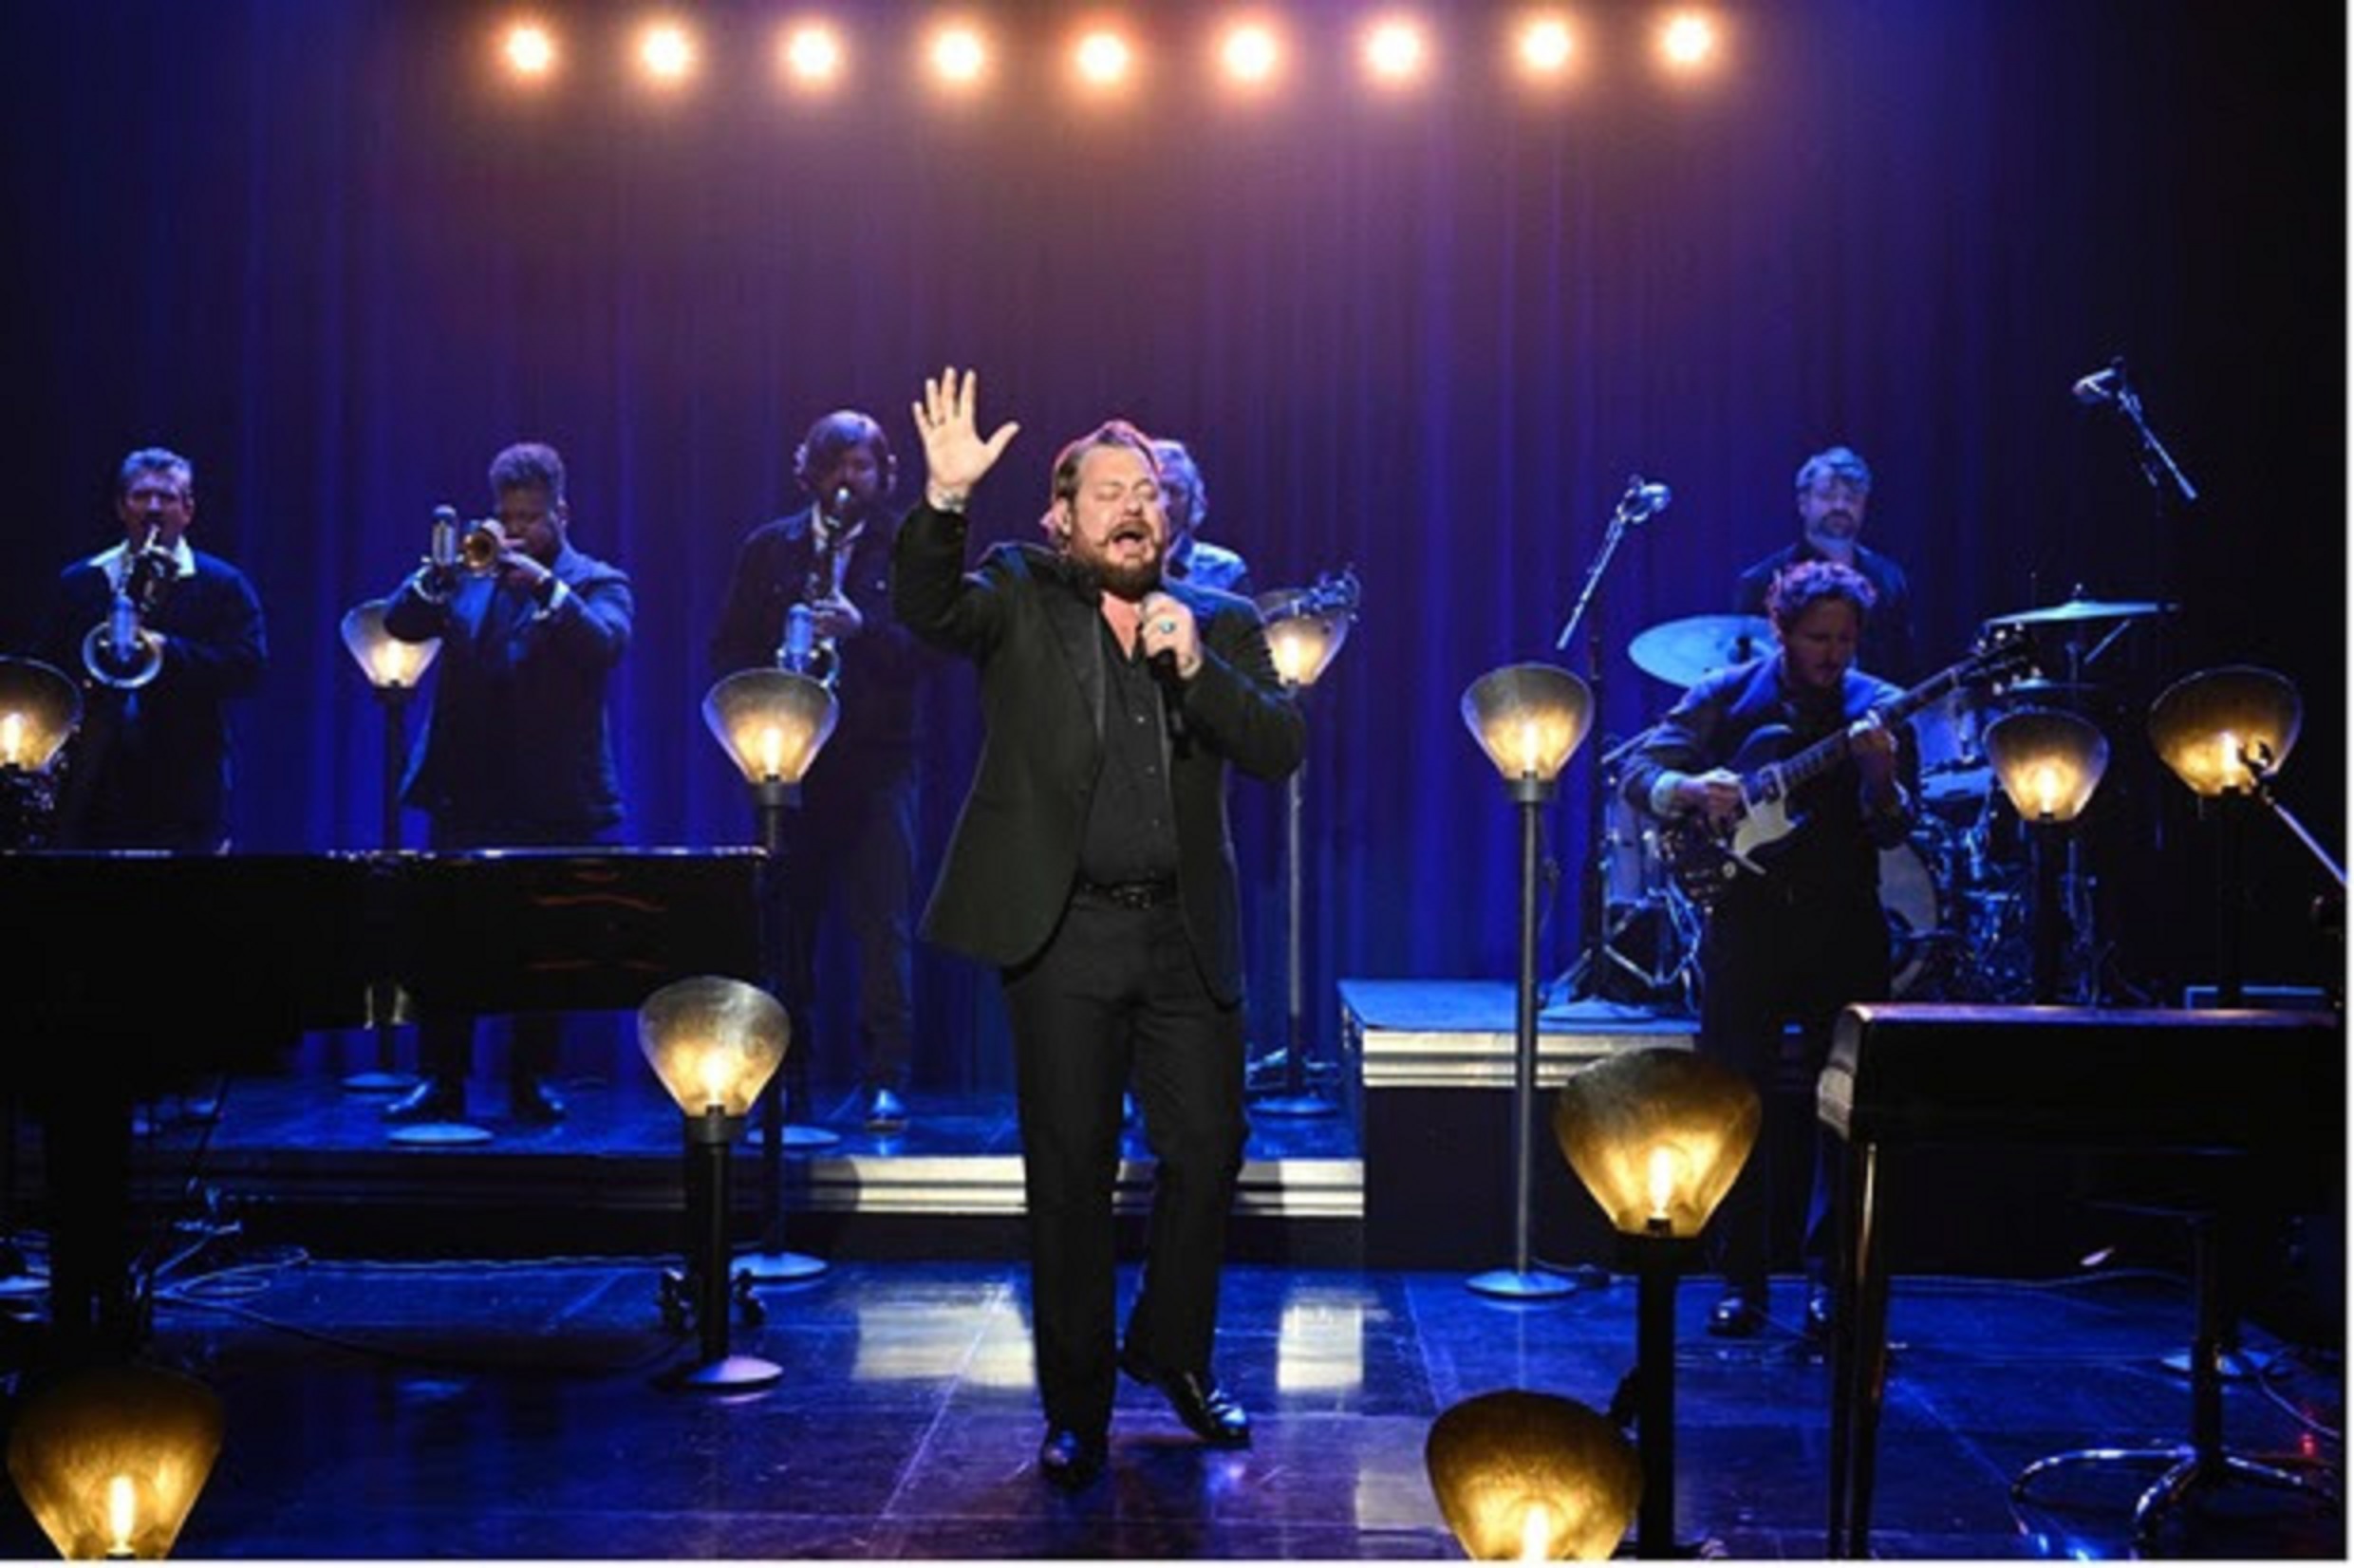 Nathaniel Rateliff & The Night Sweats perform on “The Tonight Show Starring Jimmy Fallon"